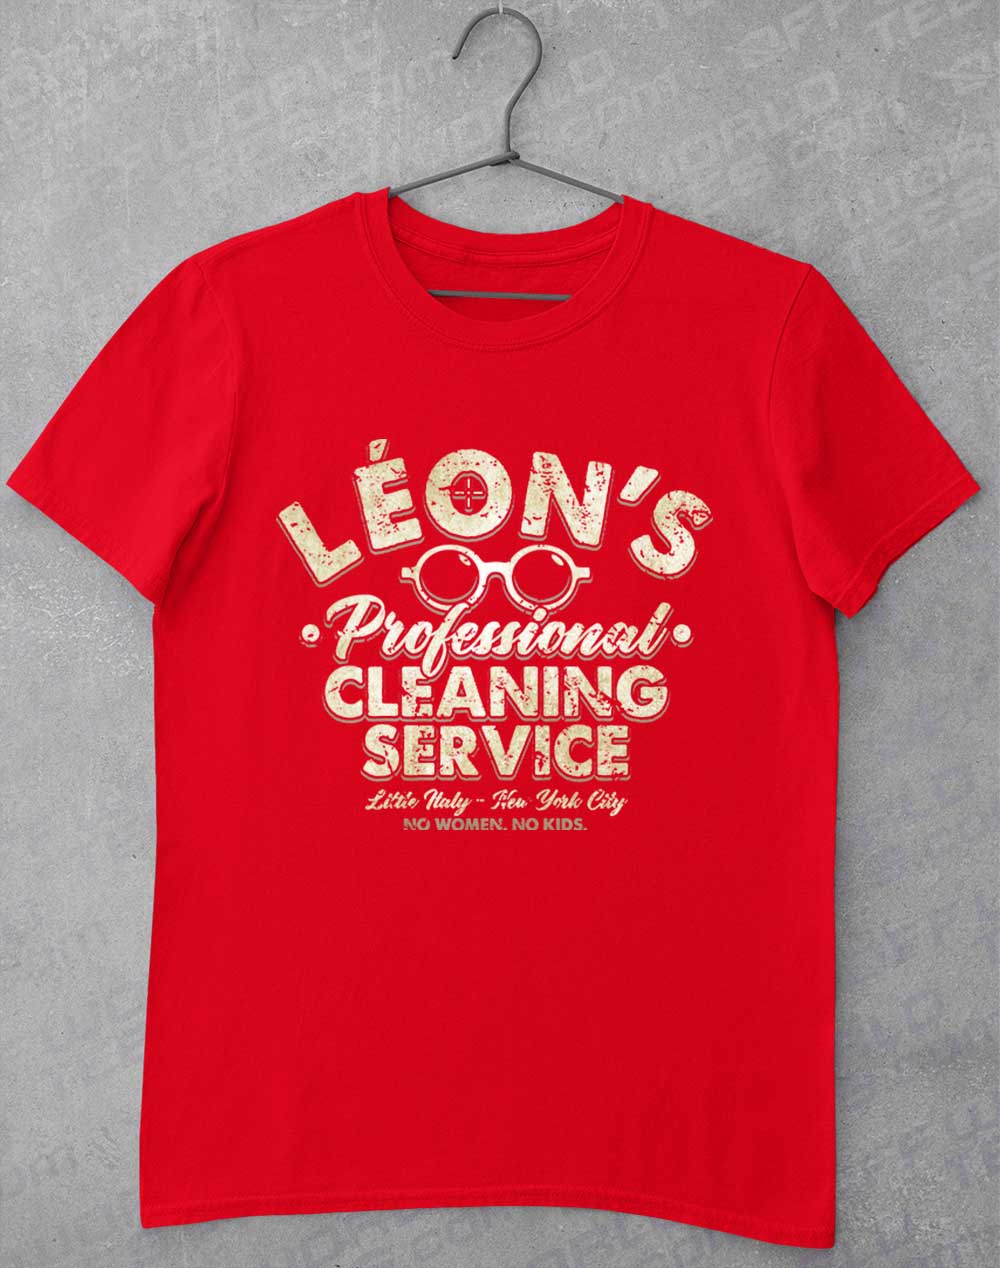 Red - Leon's Professional Cleaning T-Shirt